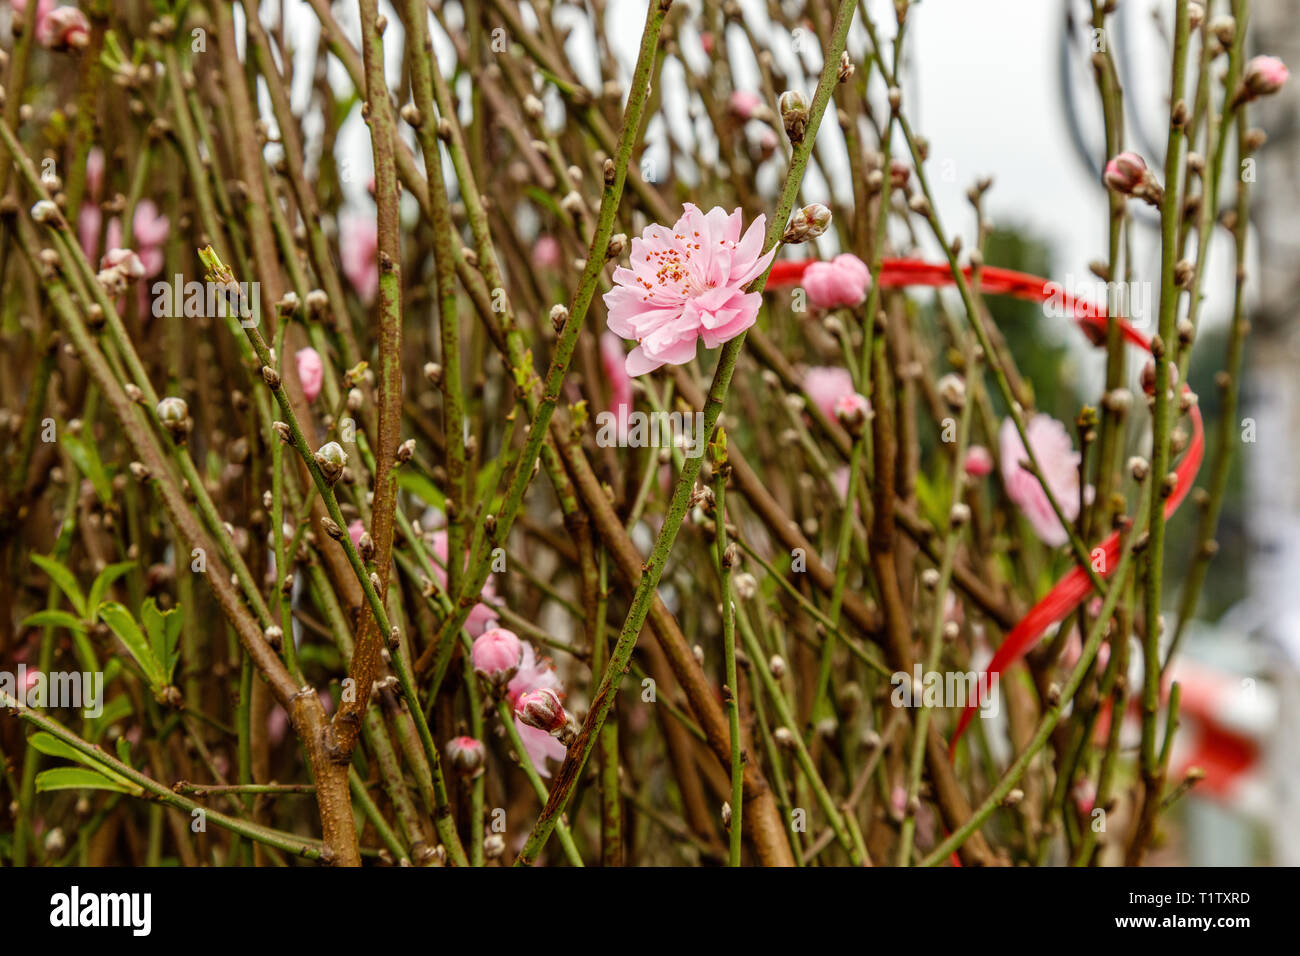 Pink peach flowers on blooming trees traditional for celebrating Tet, Vietnamese new year in Hanoi, Vietnam. Stock Photo